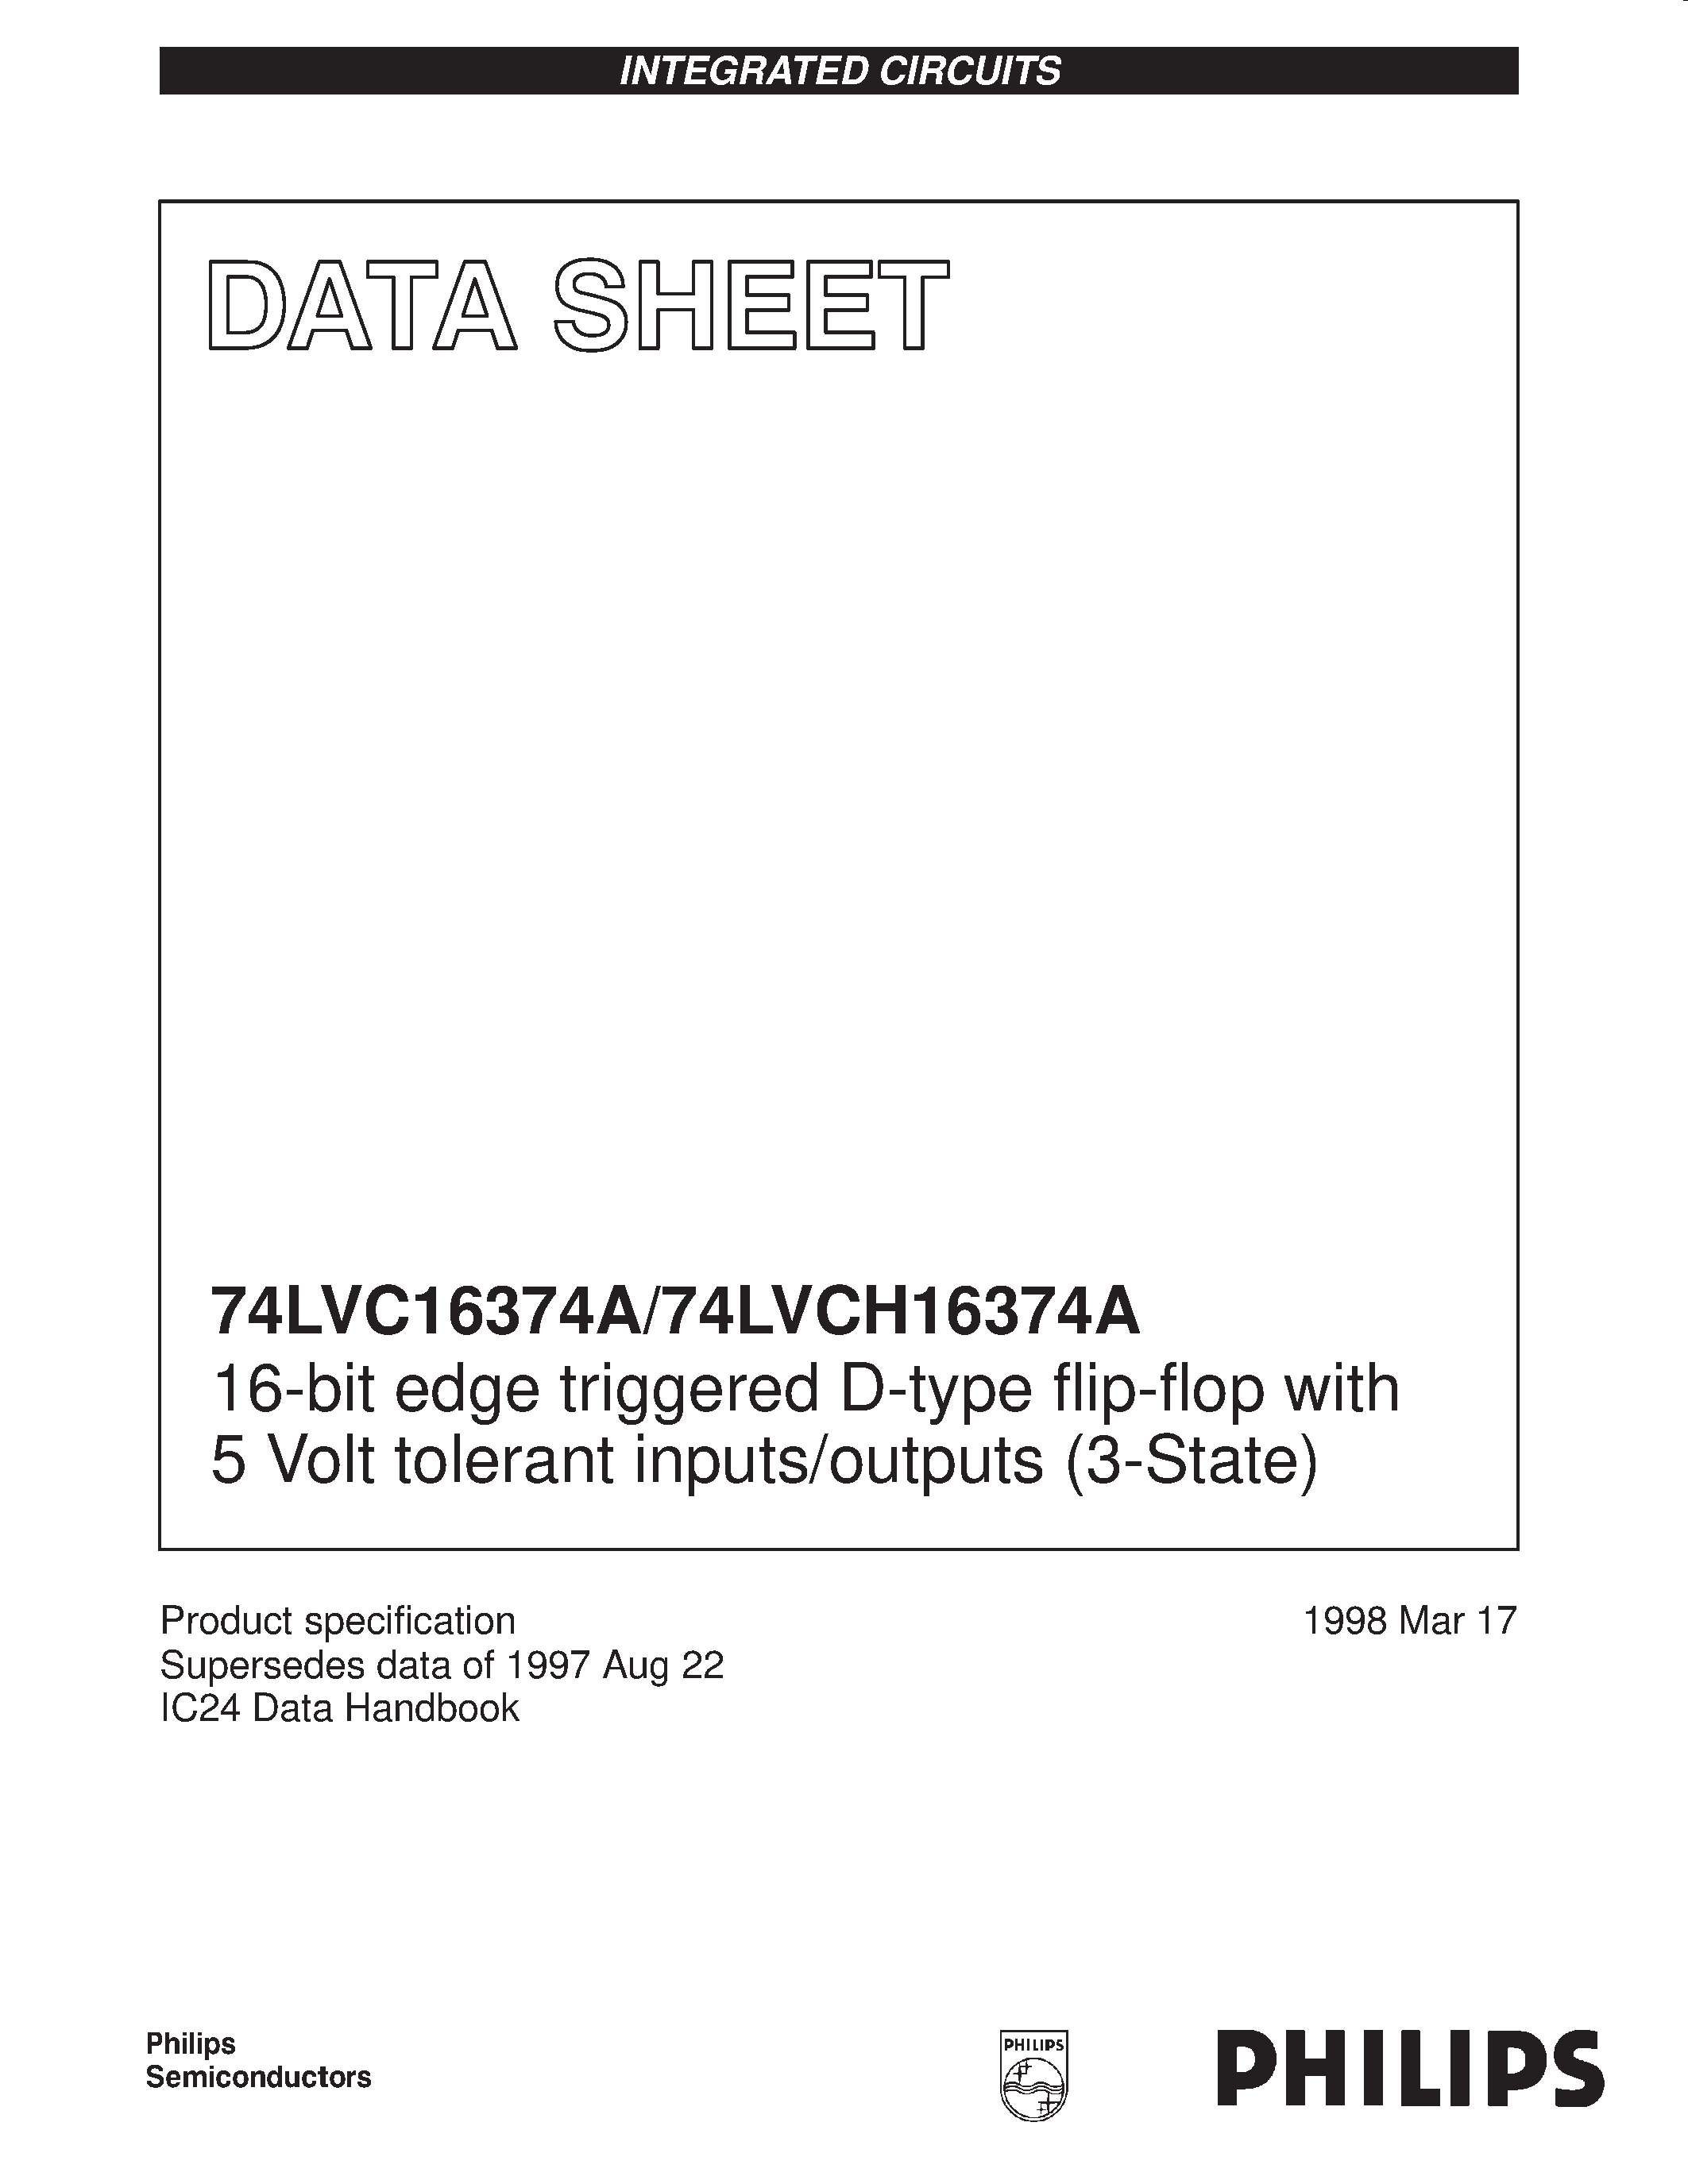 Datasheet VC16374ADL - 16-bit edge triggered D-type flip-flop with 5 Volt tolerant inputs/outputs 3-State page 1